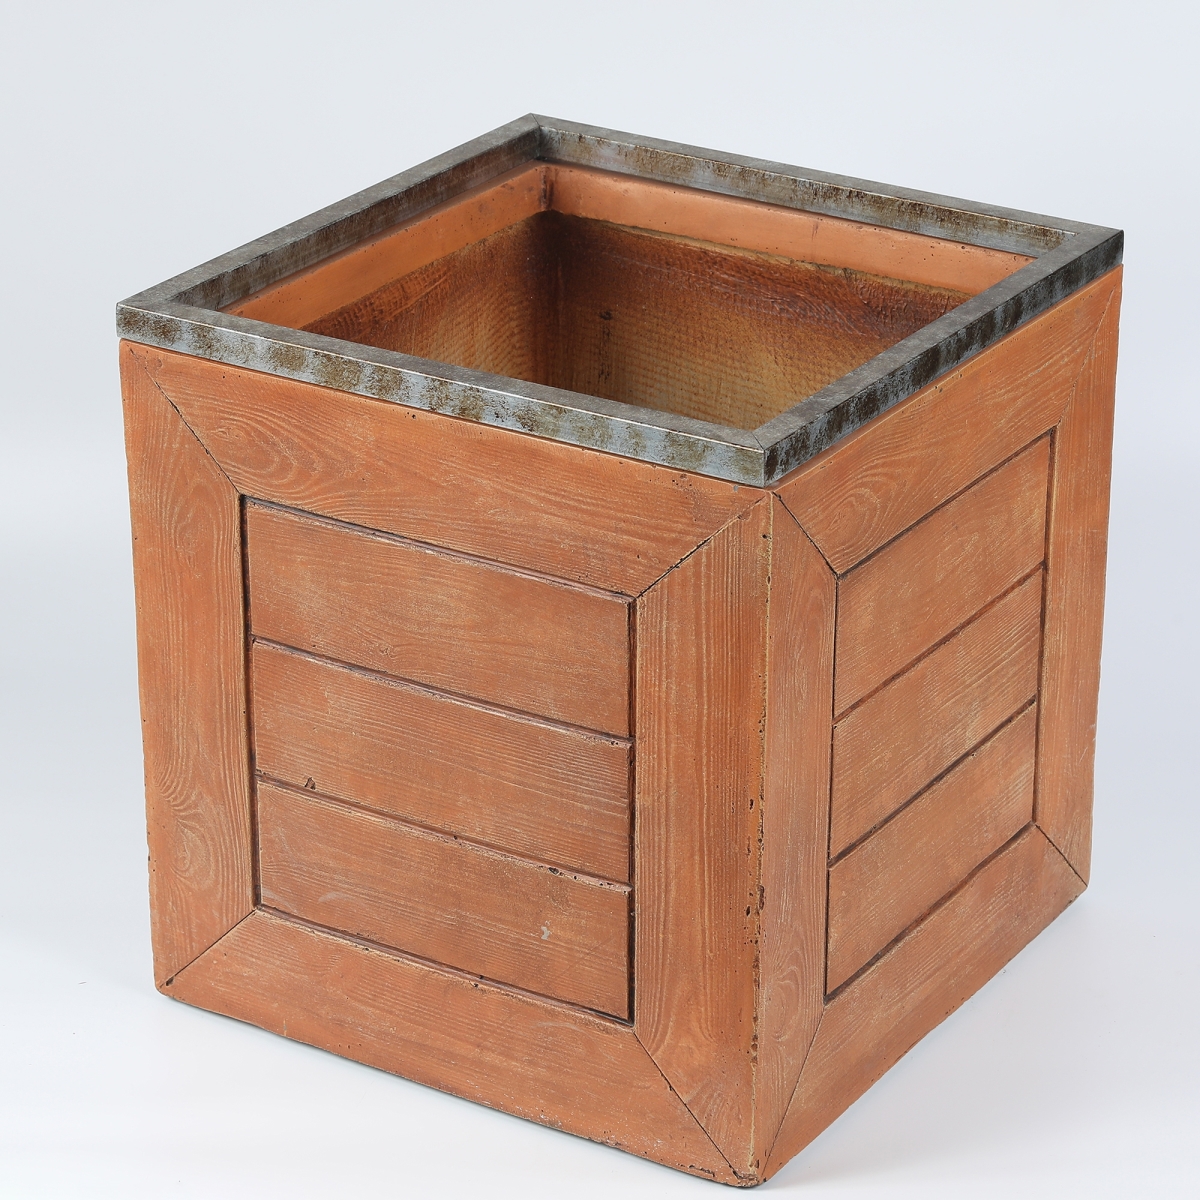 Whpl715 16.5 In. Square Mgo Fiberclay Crate Style Planter